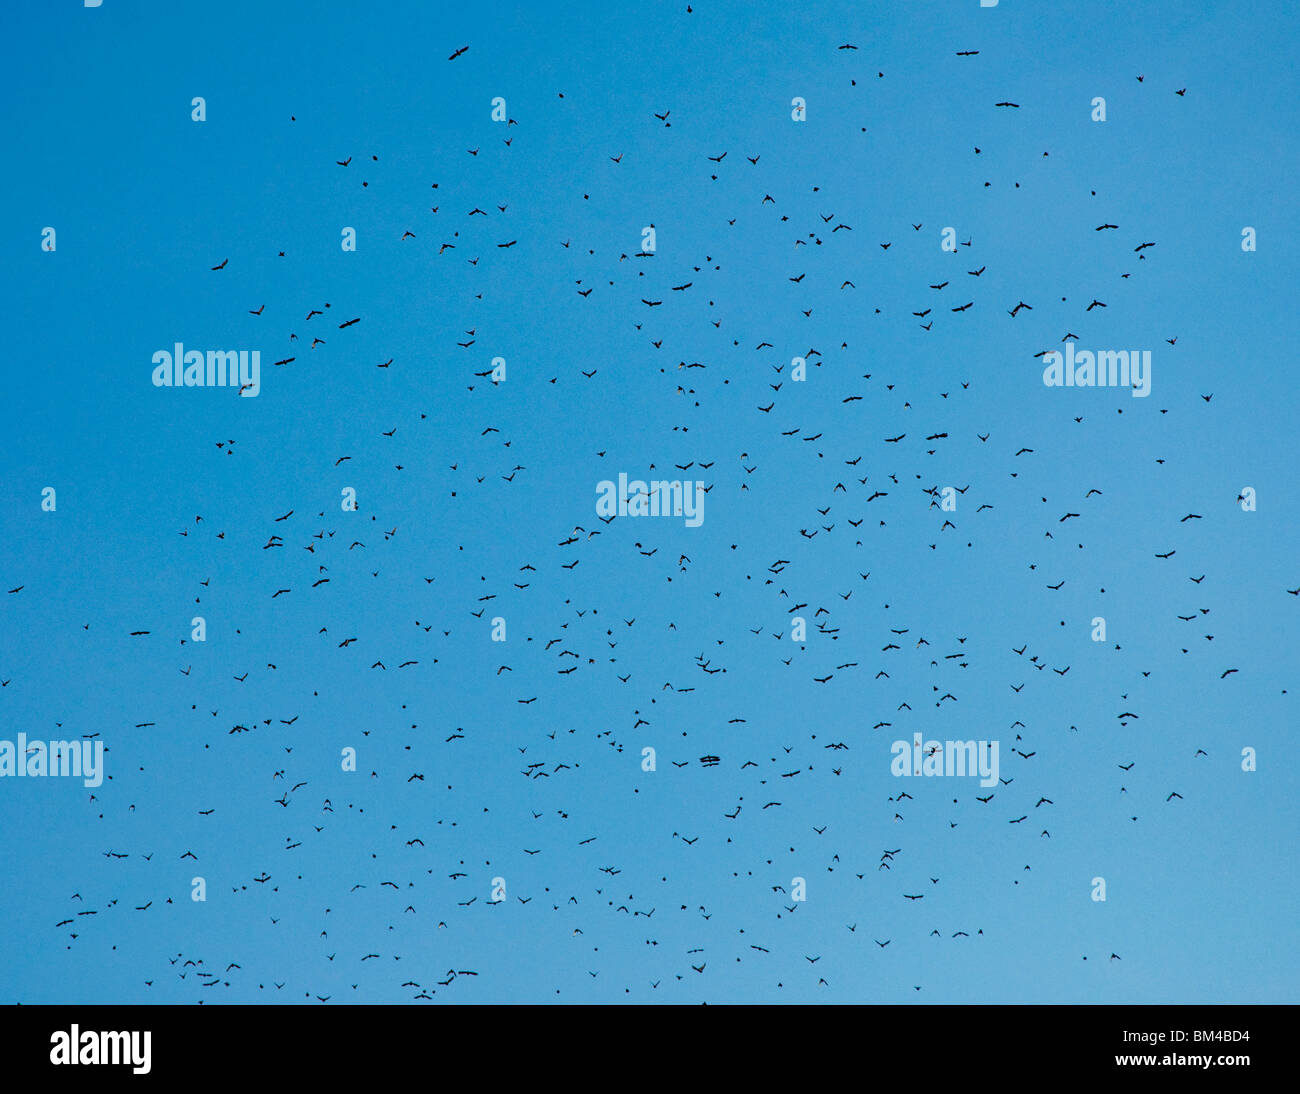 A flock of birds flying together in the air. Stock Photo